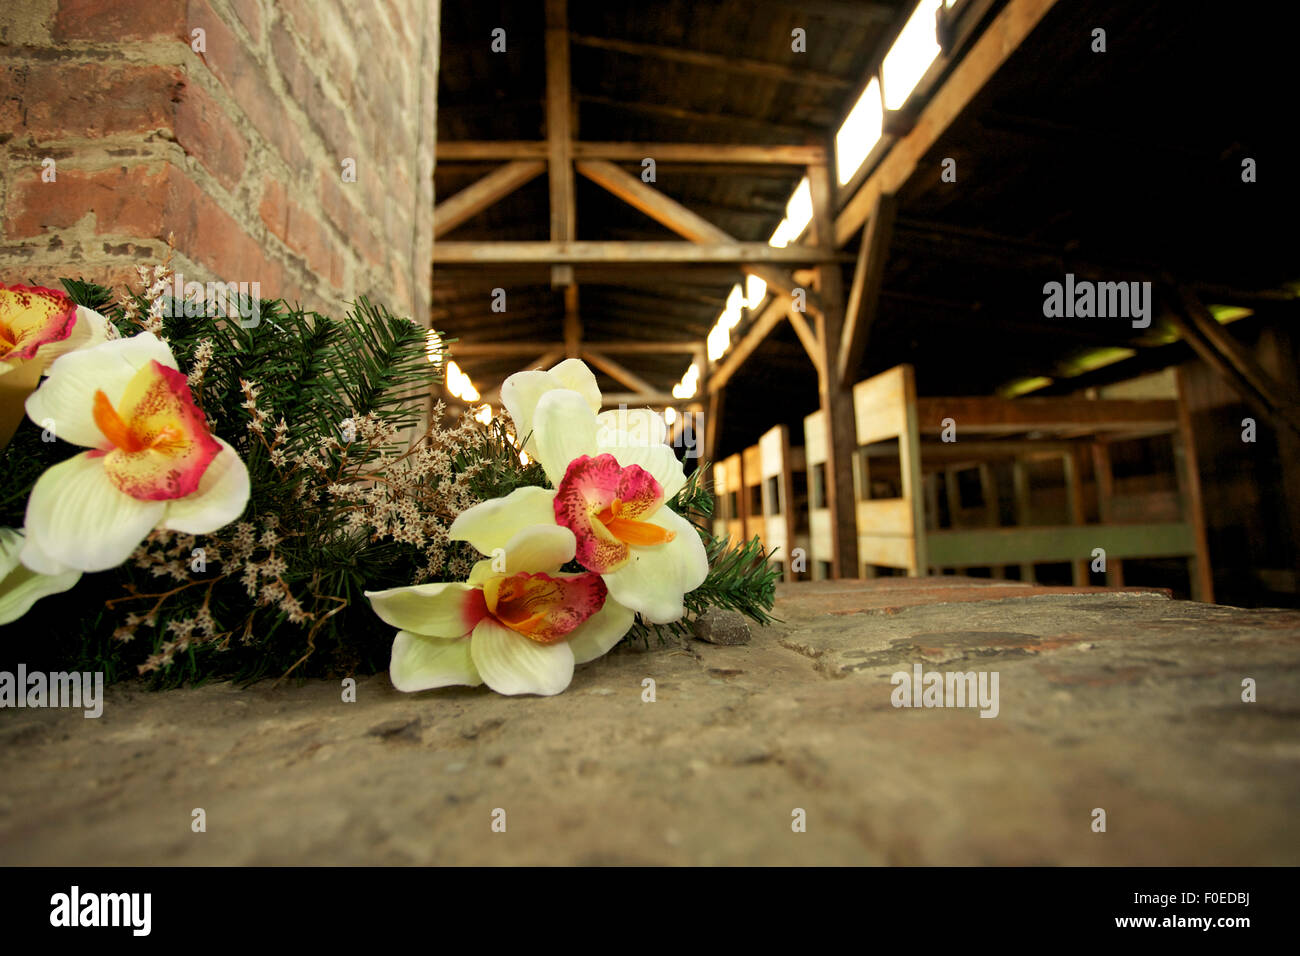 Inside wood houses in Auschwitz Birkenau concentration camp with flowers Stock Photo